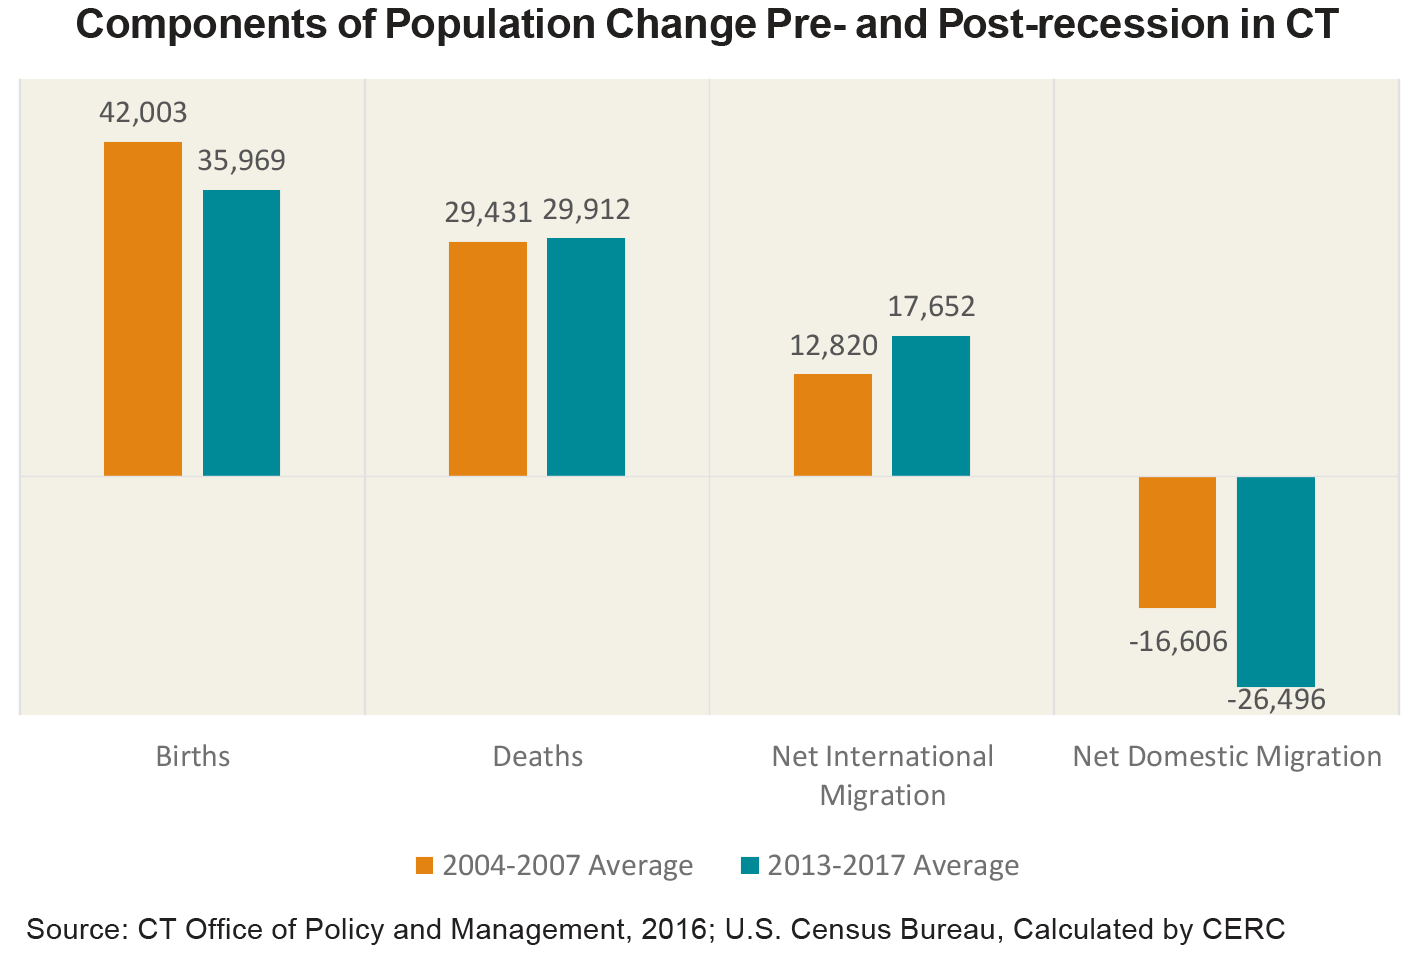 Components of Population Change Pre - and Post-recession in CT